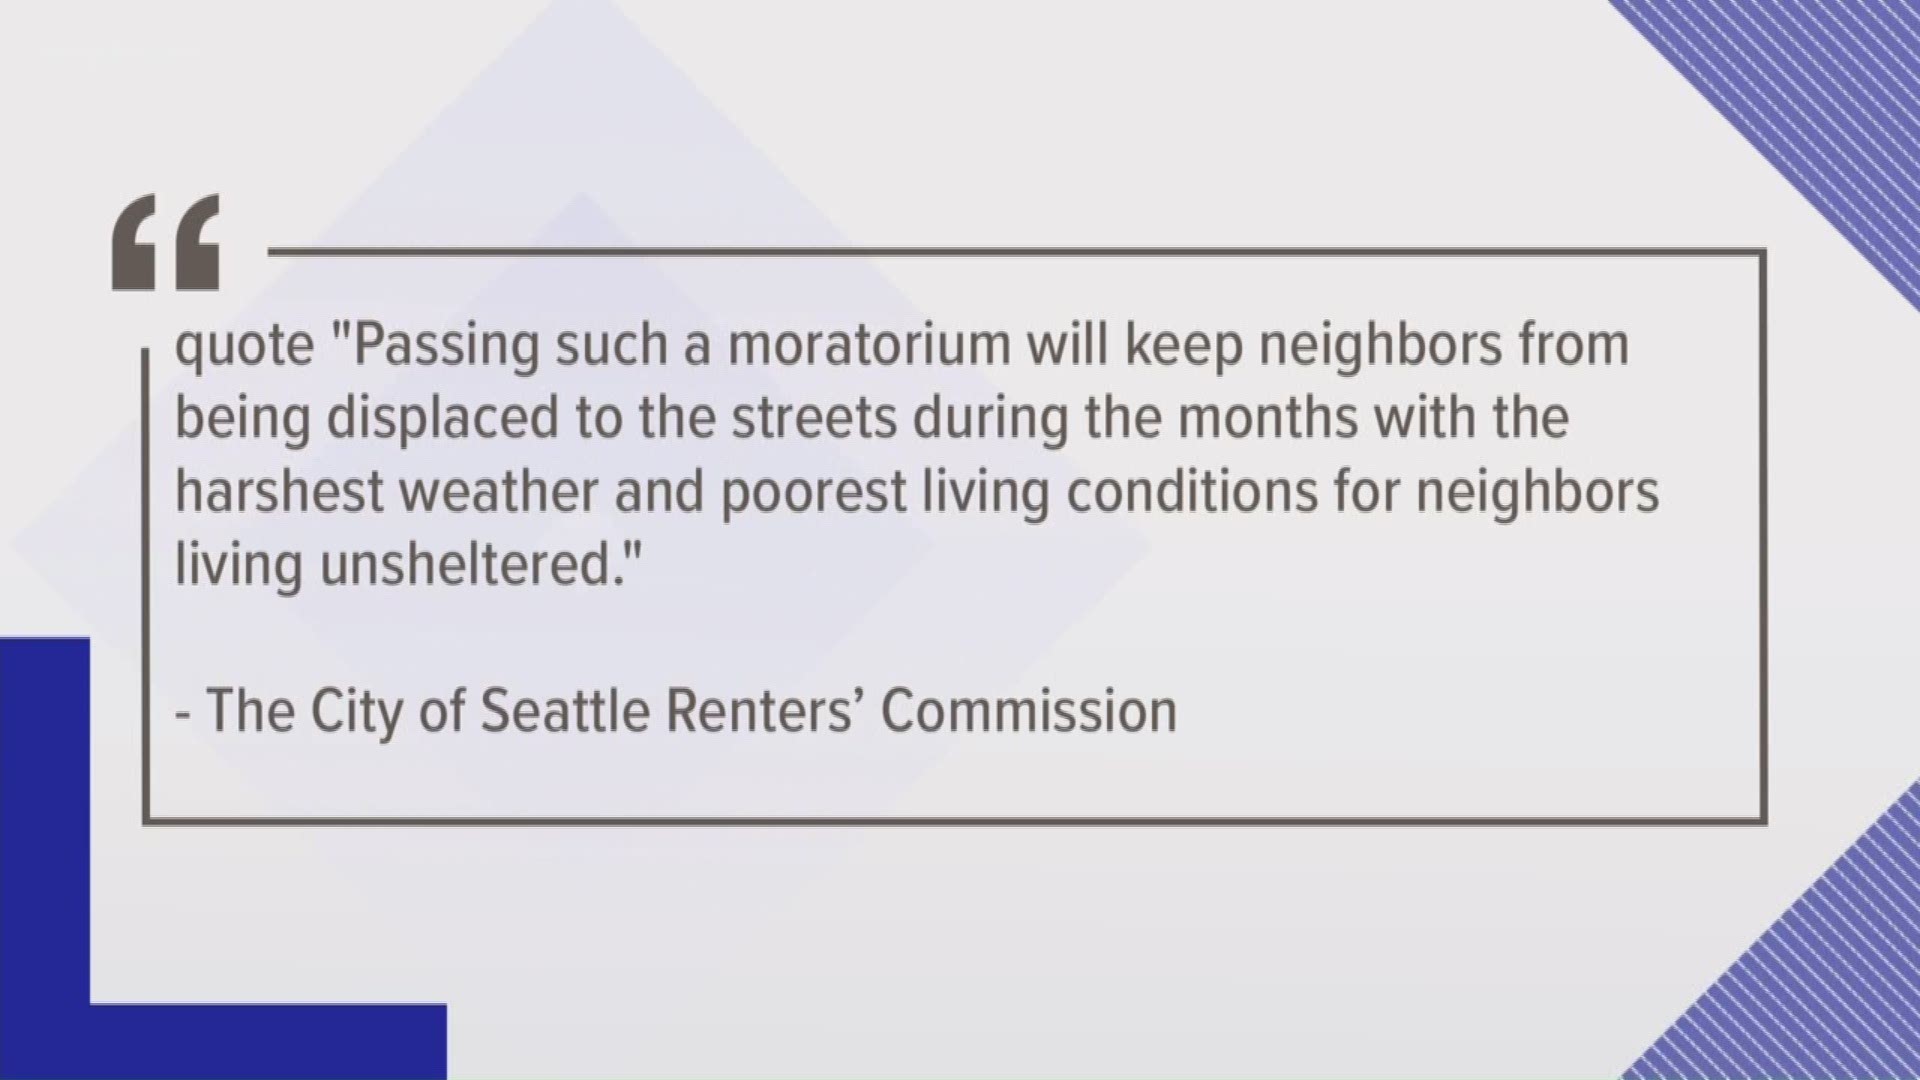 Seattle city council member, Kshama Sawant, says she is introducing an ordinance regarding evictions of renters during winter months.